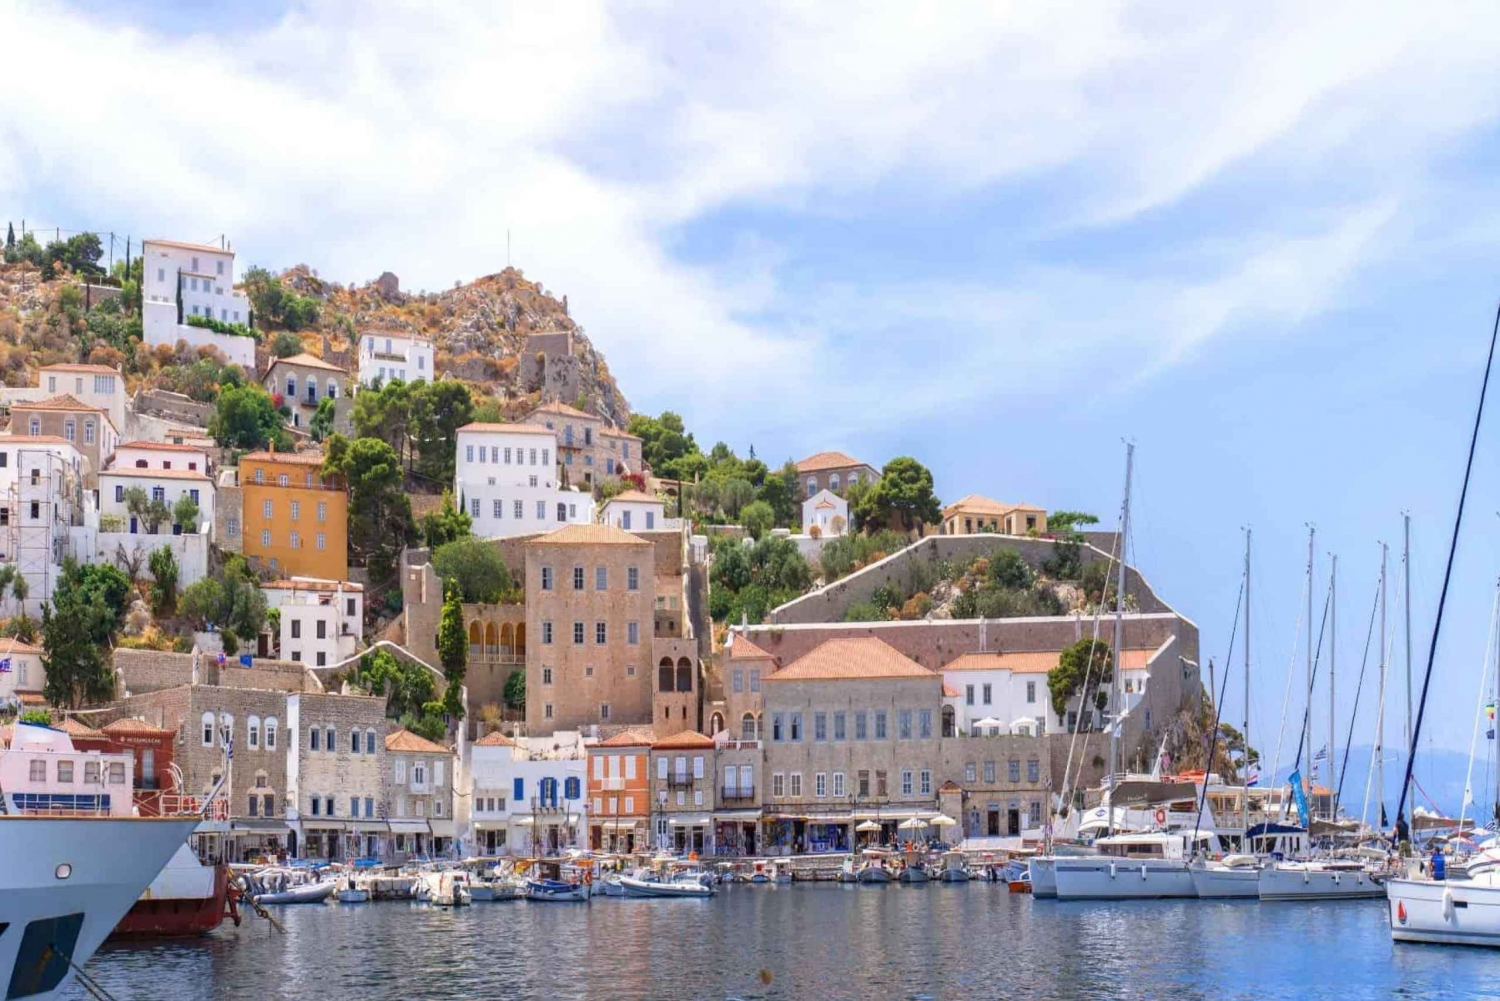 'All-Day Private Excursion to Hydra Island from Athens'